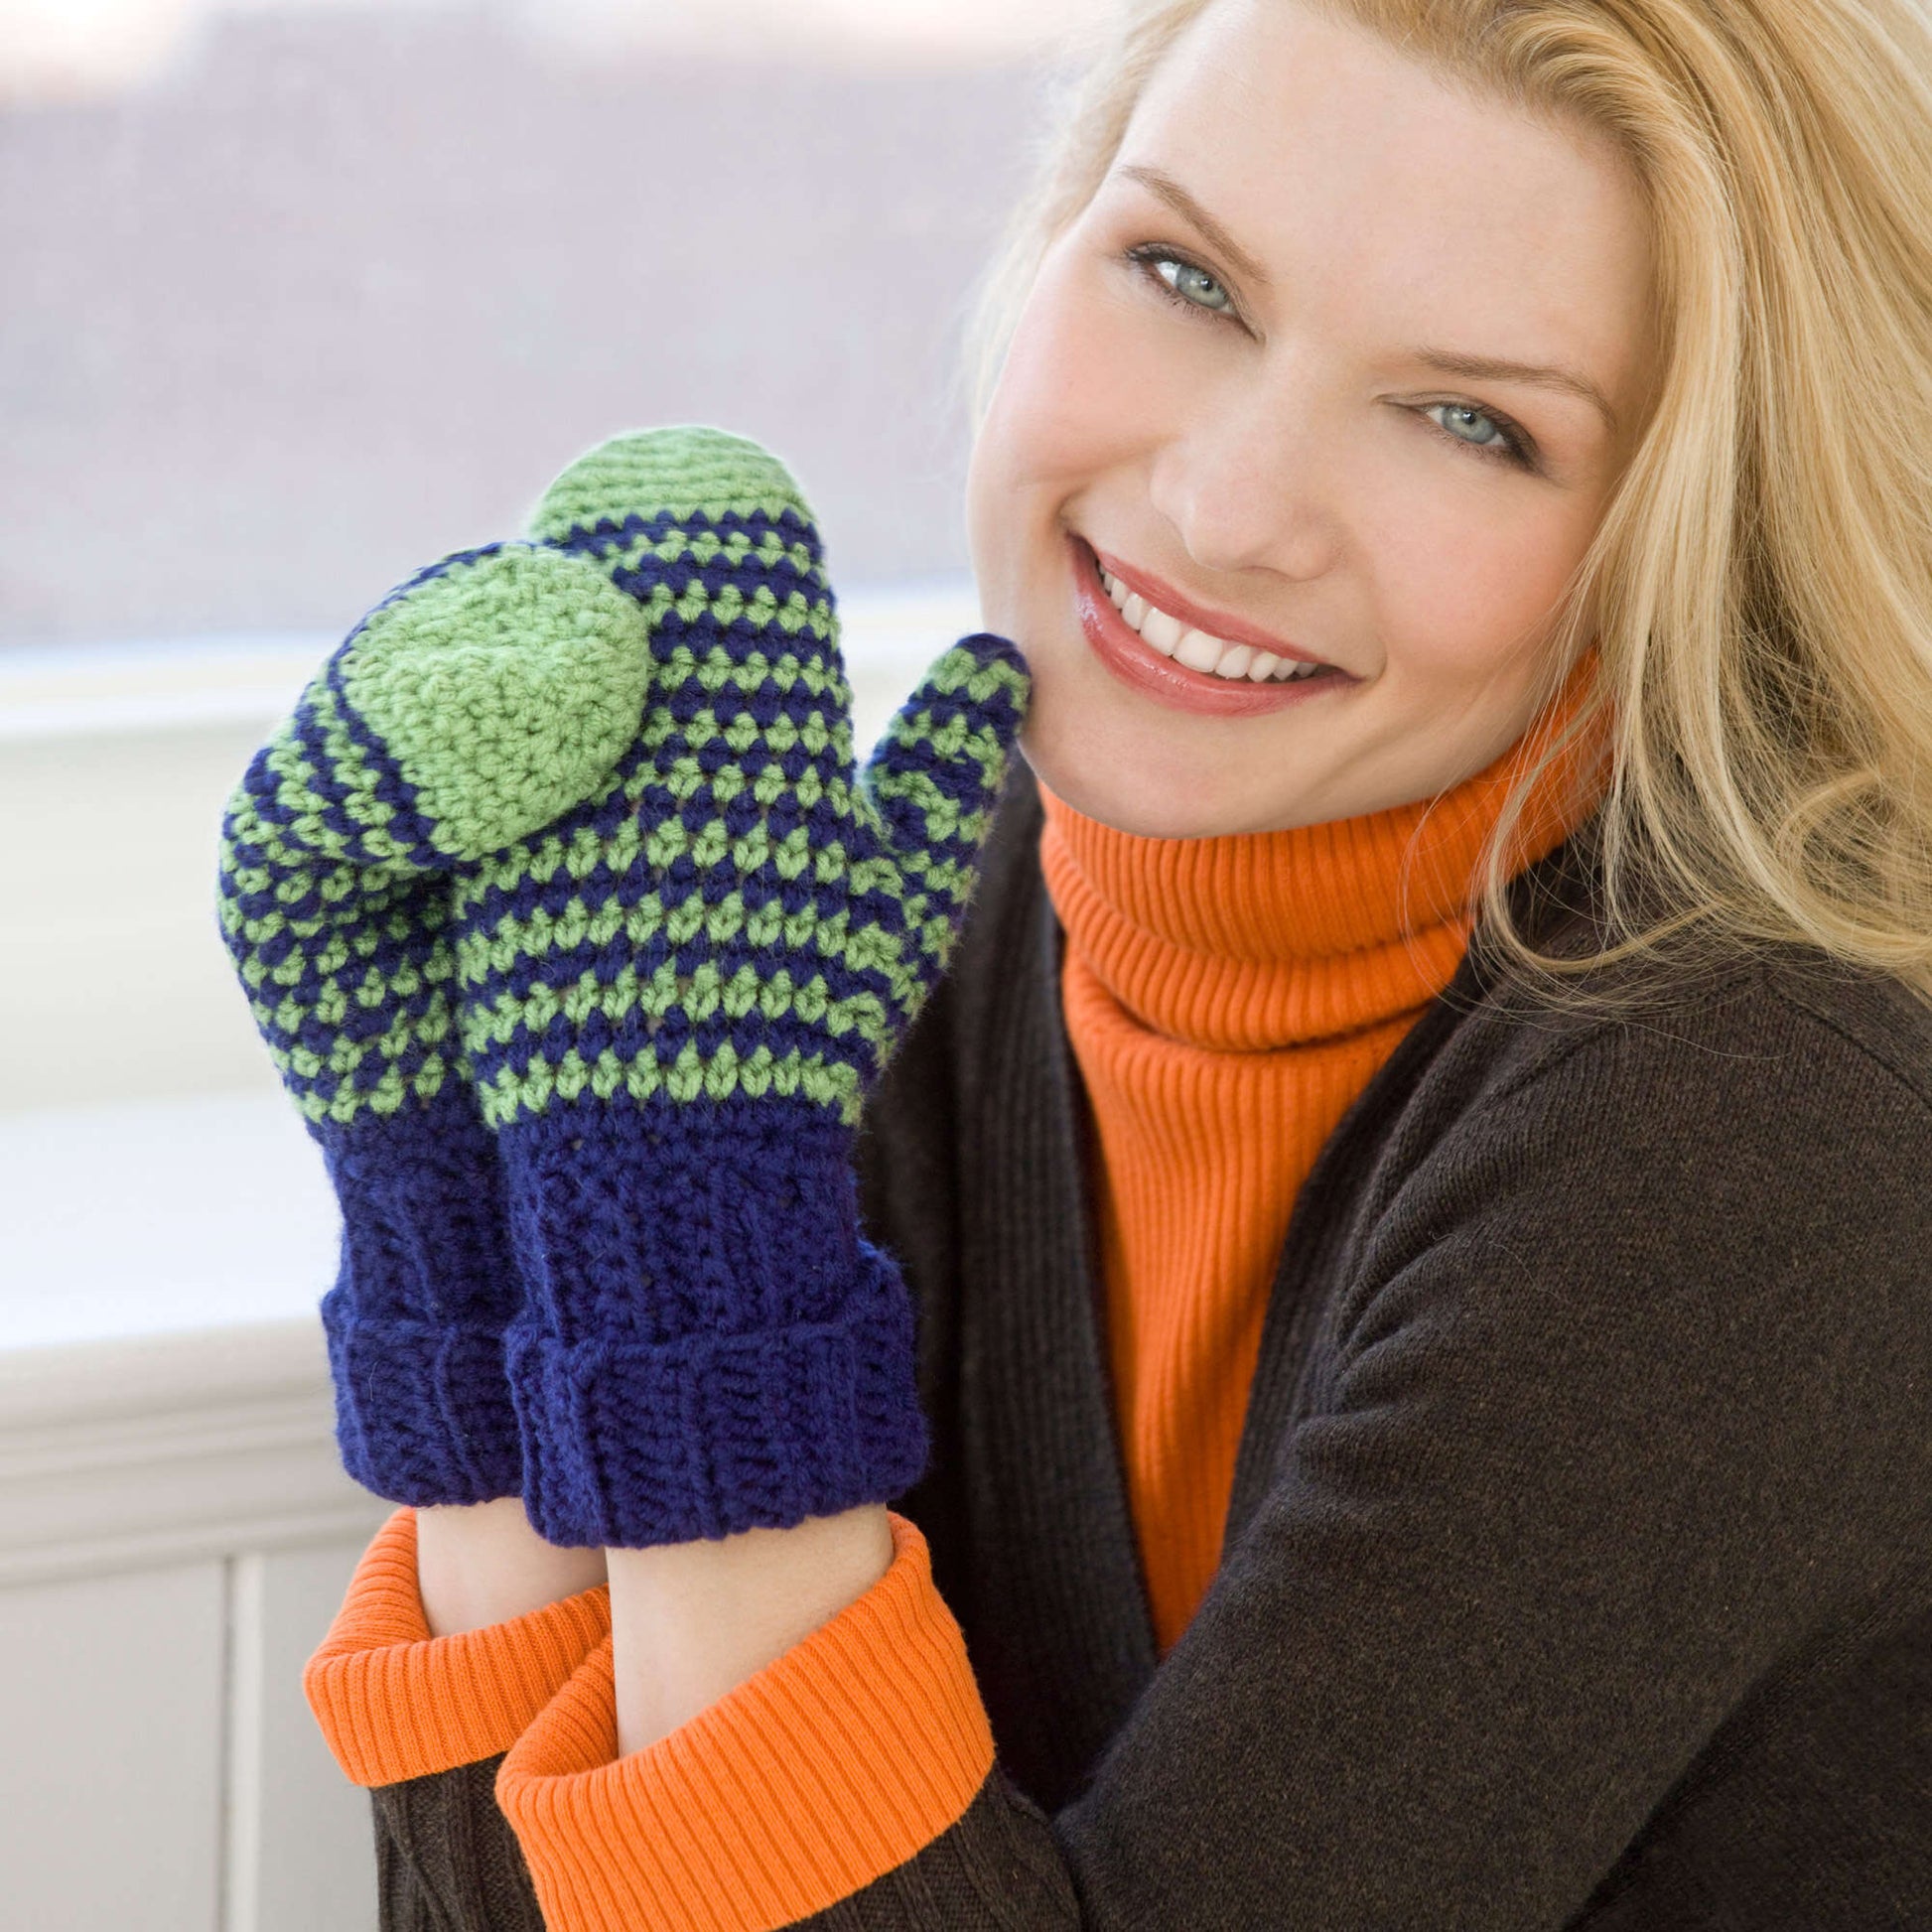 Red Heart Crochet Mittens For All Pattern | Yarnspirations